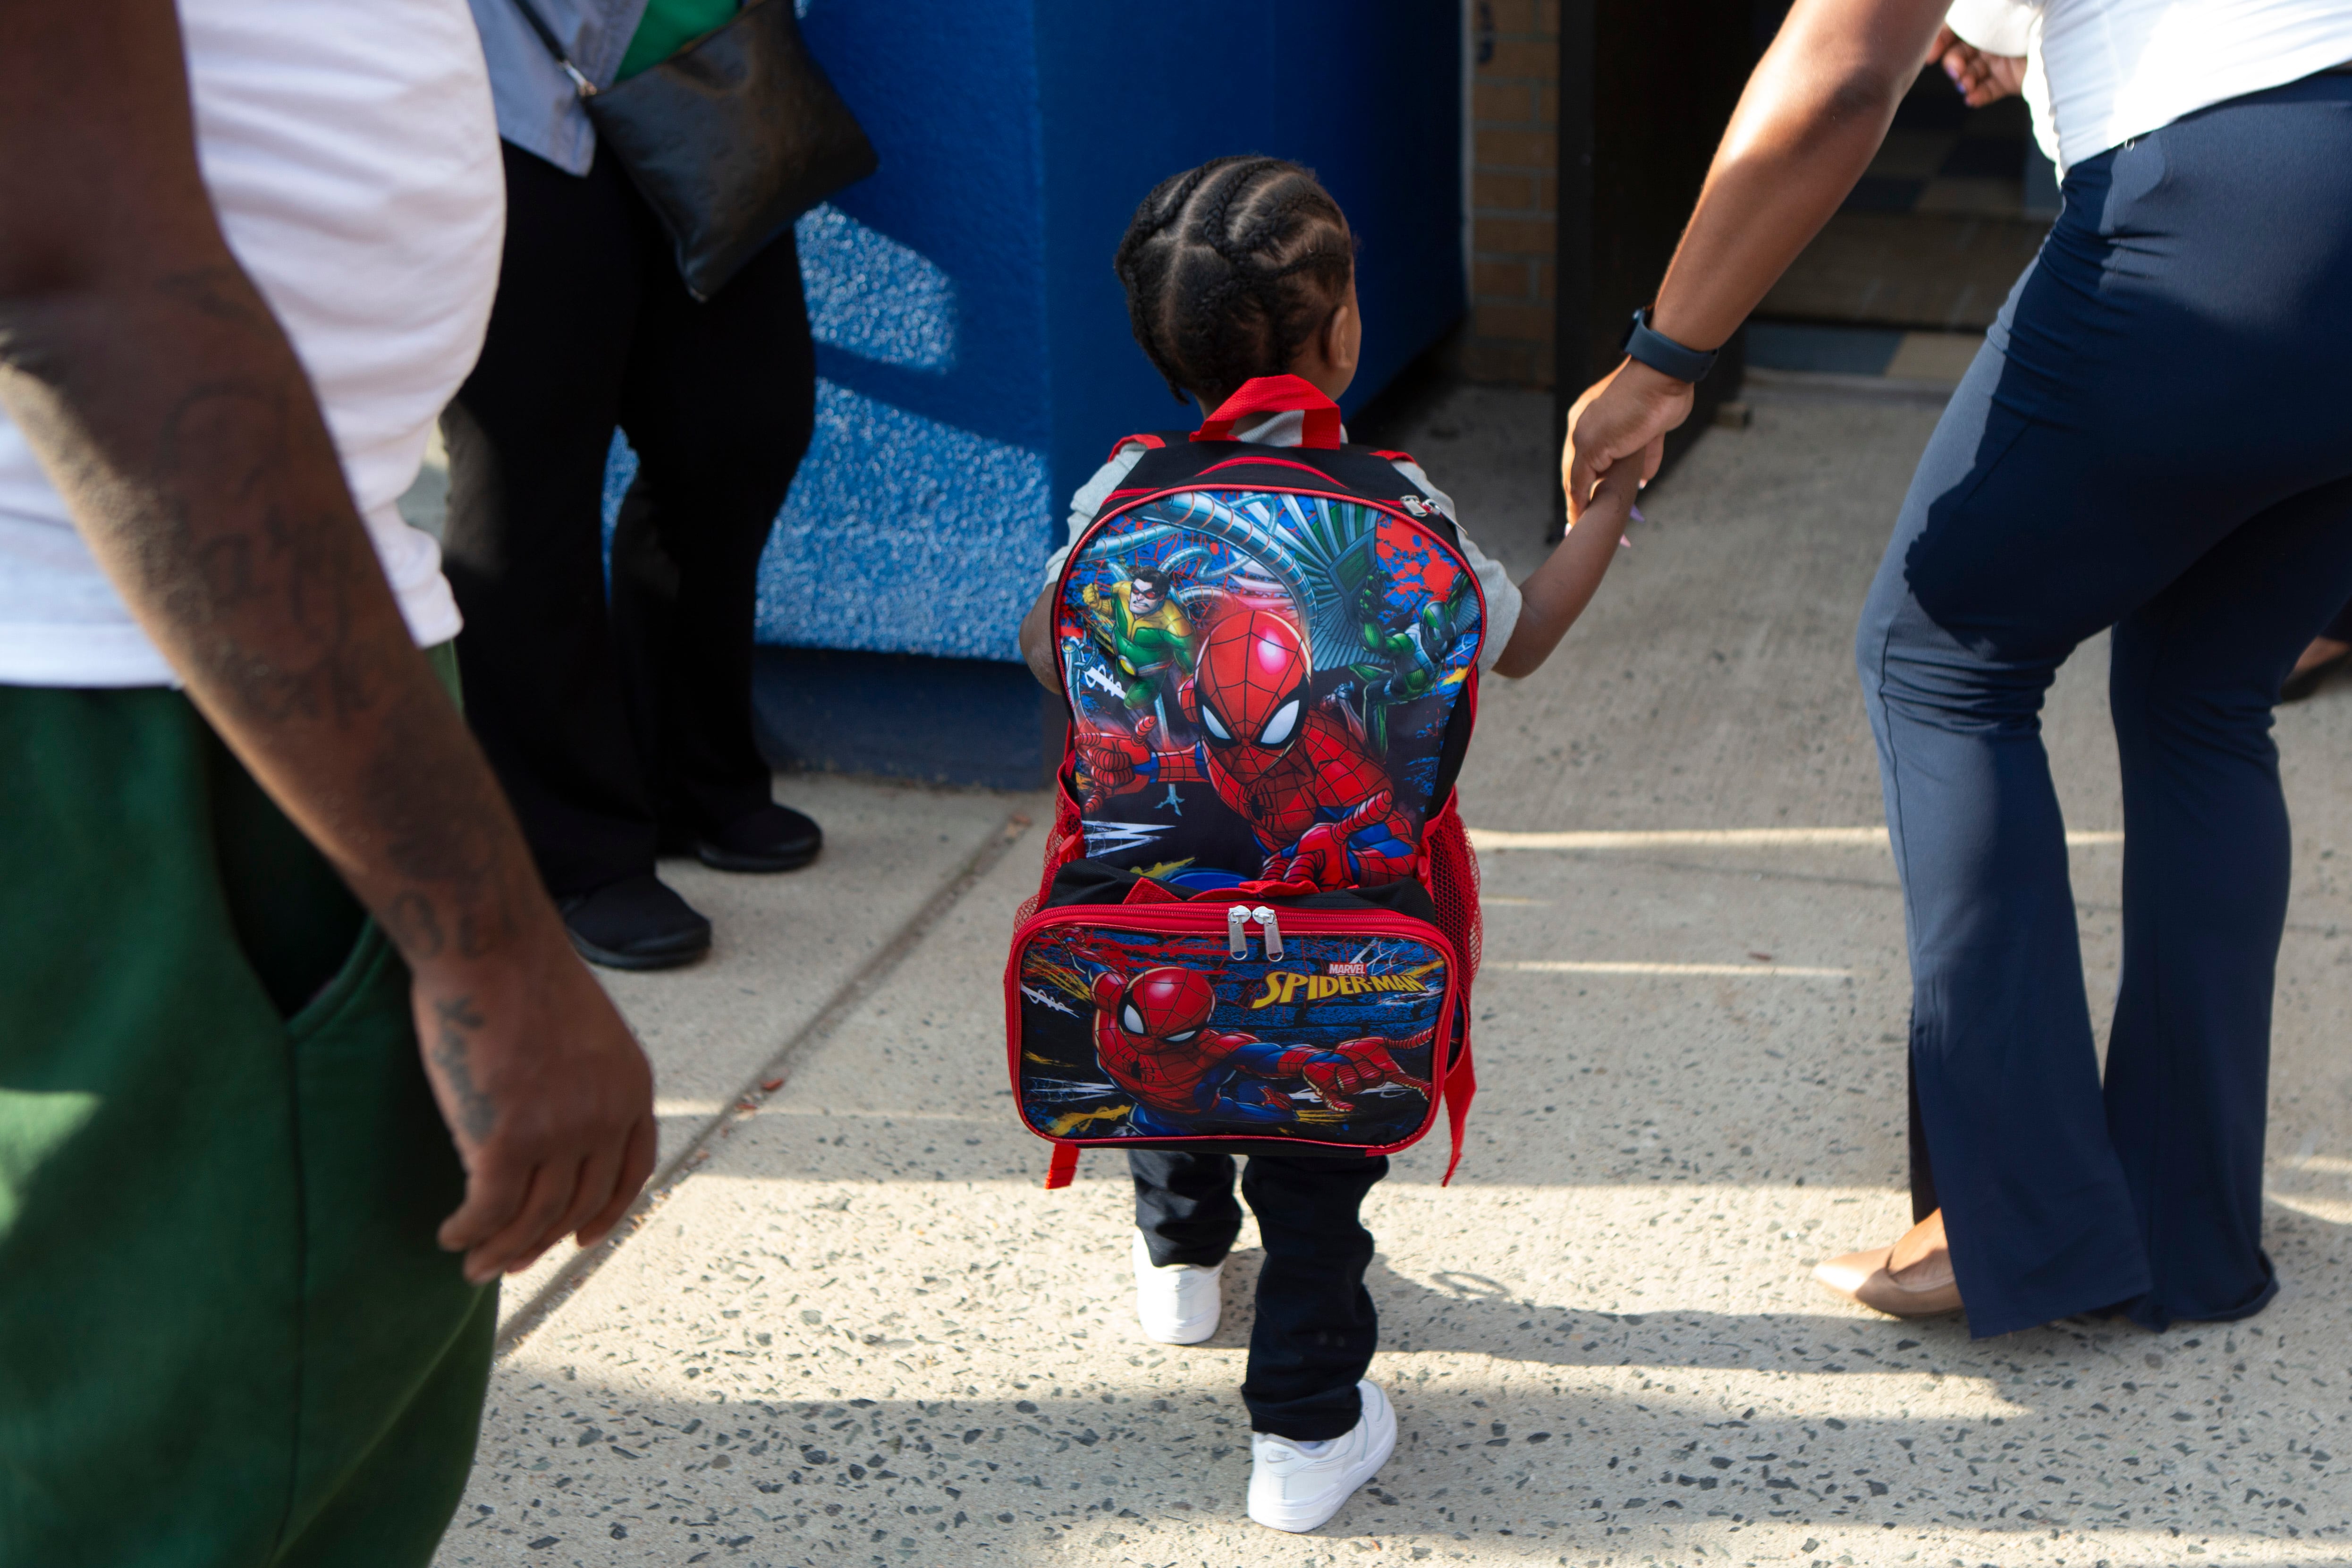 A young student with braids and wearing a large red Spiderman backpack, walks towards the school building holding the hand of an adult.